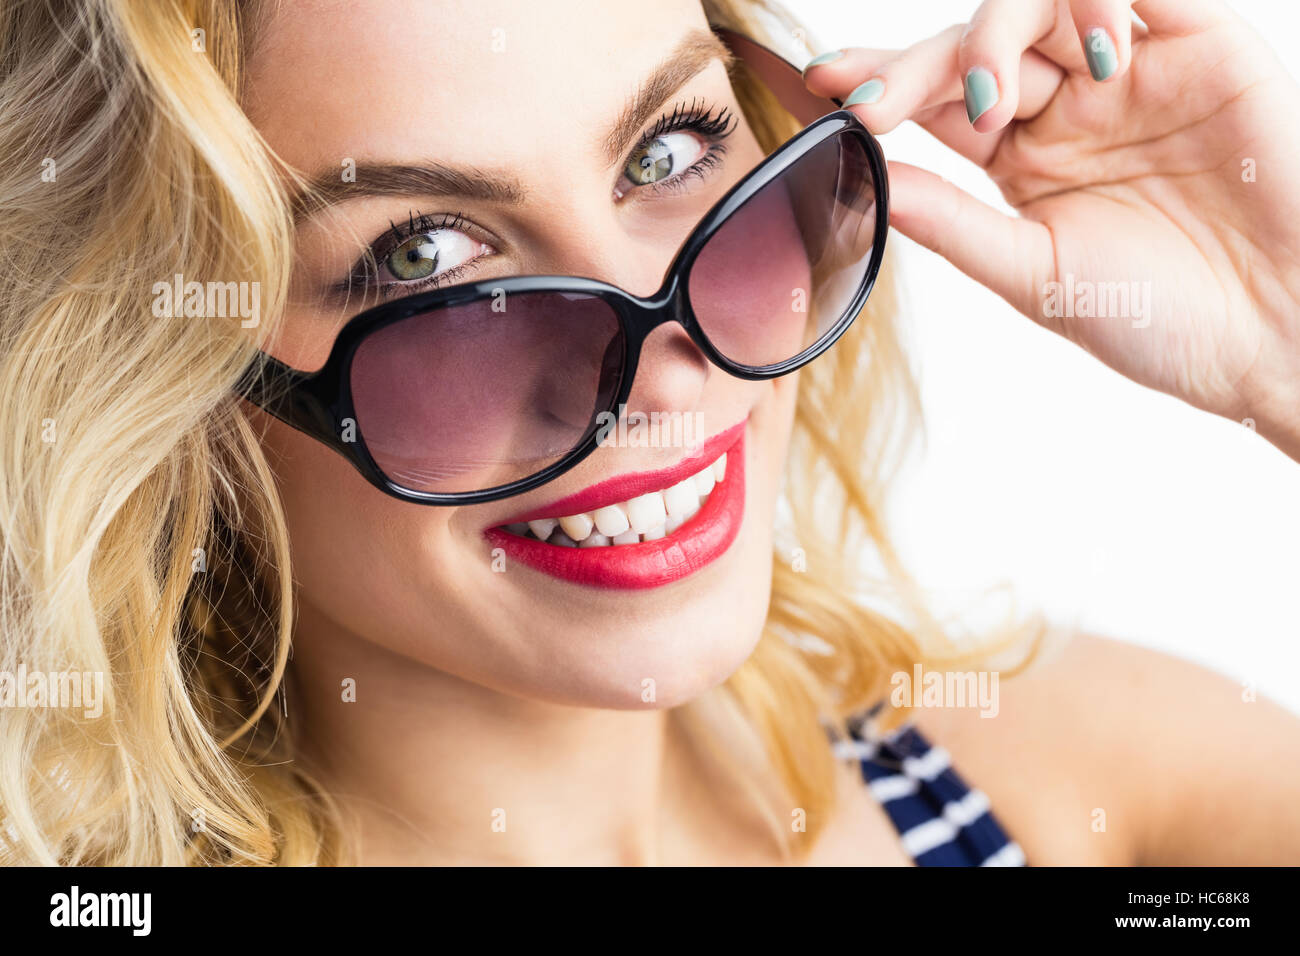 Portrait of beautiful woman posing with sunglasses against white background Stock Photo